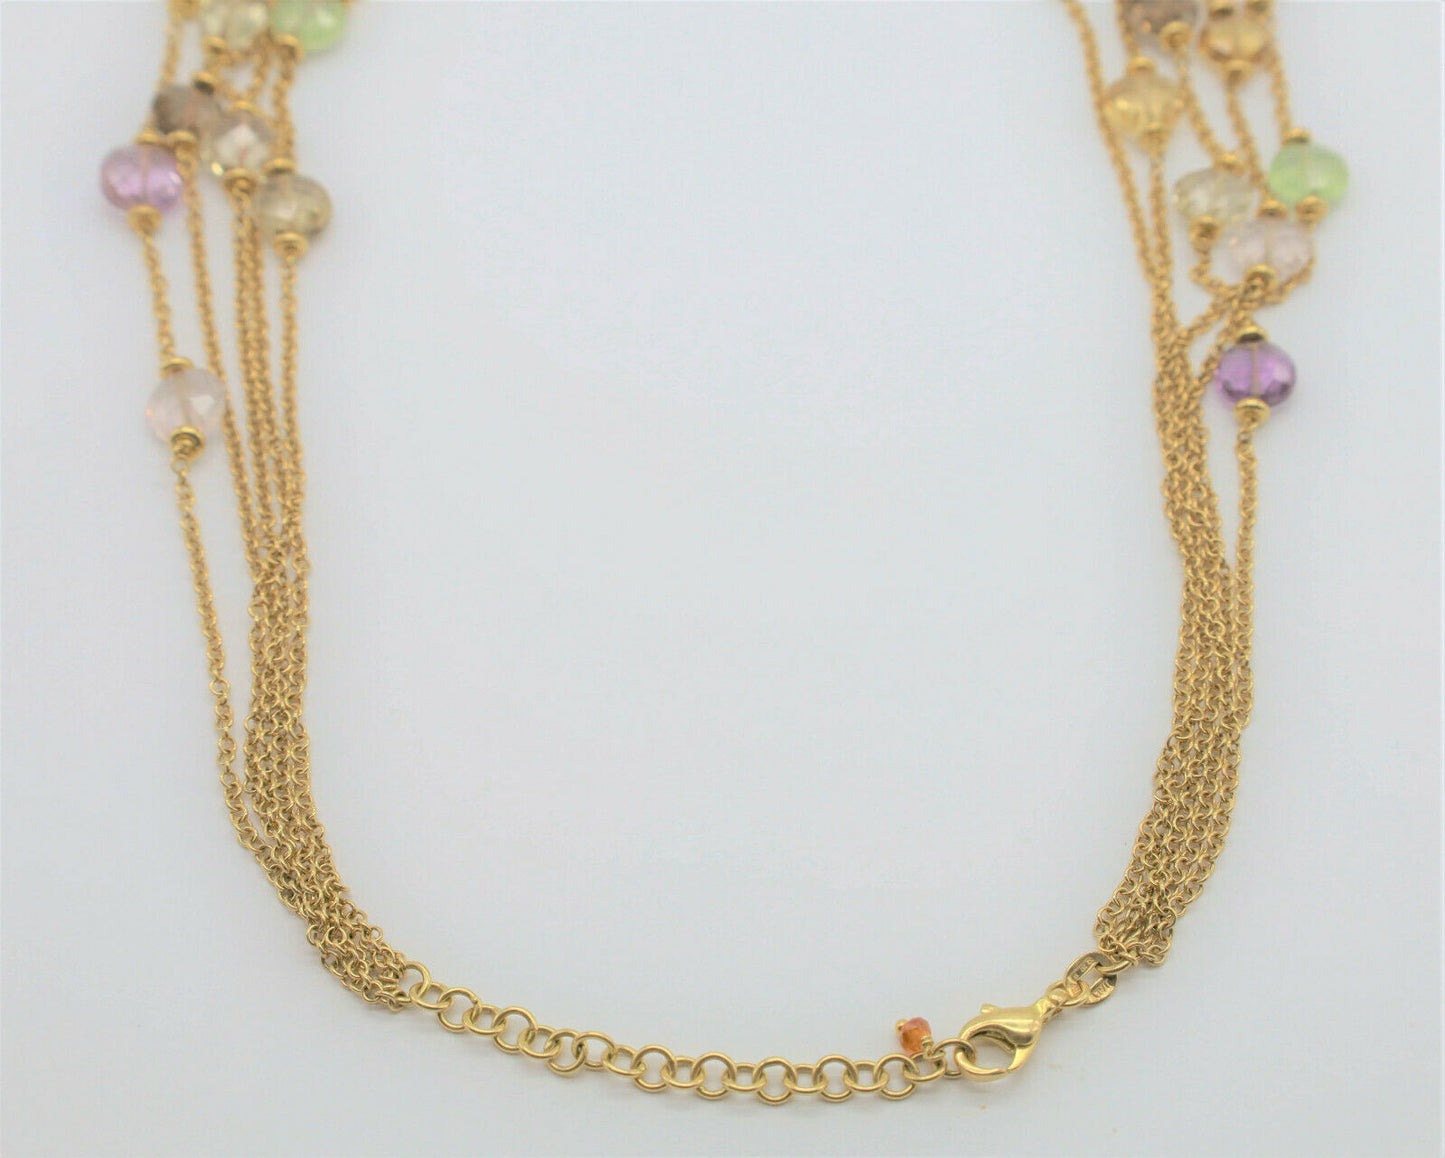 18k Yellow Gold 5 Strand Multi-Stone Adjustable Necklace, 16 to 18 inches - 37.7g